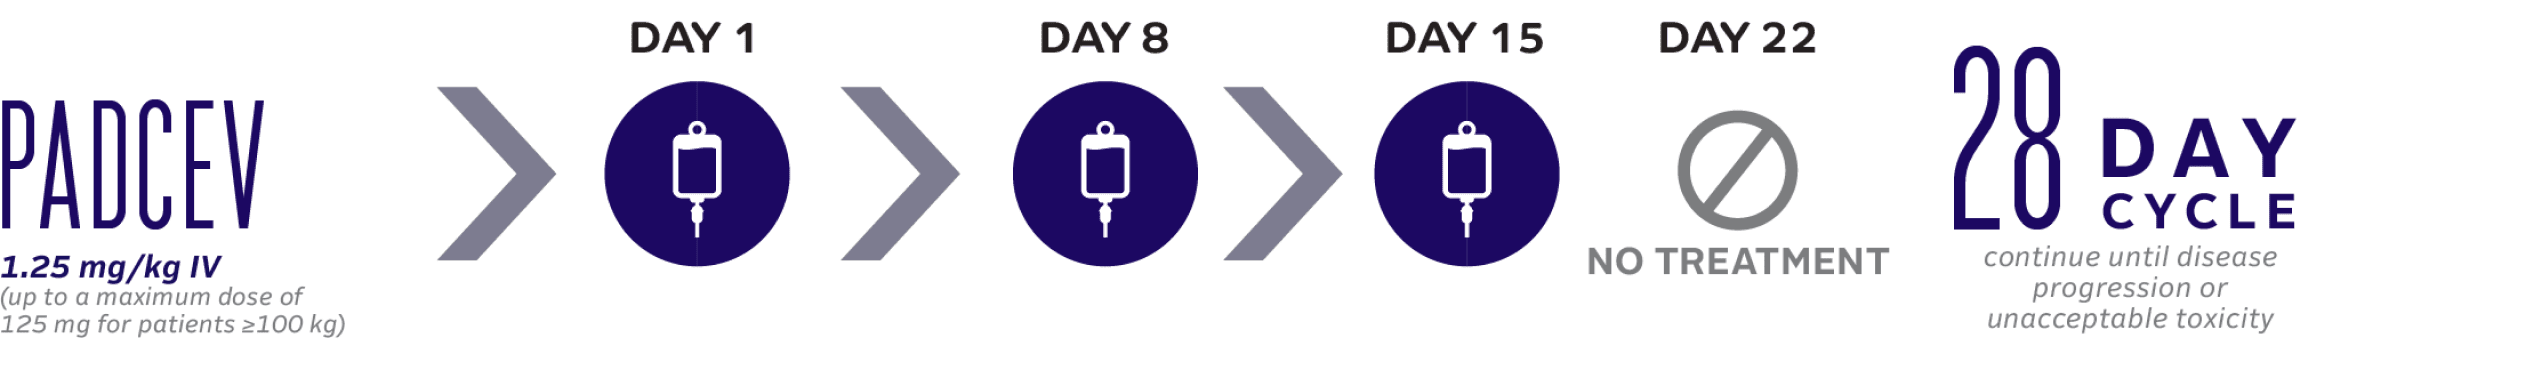 PADCEV monotherapy 28-day dosing cycle.